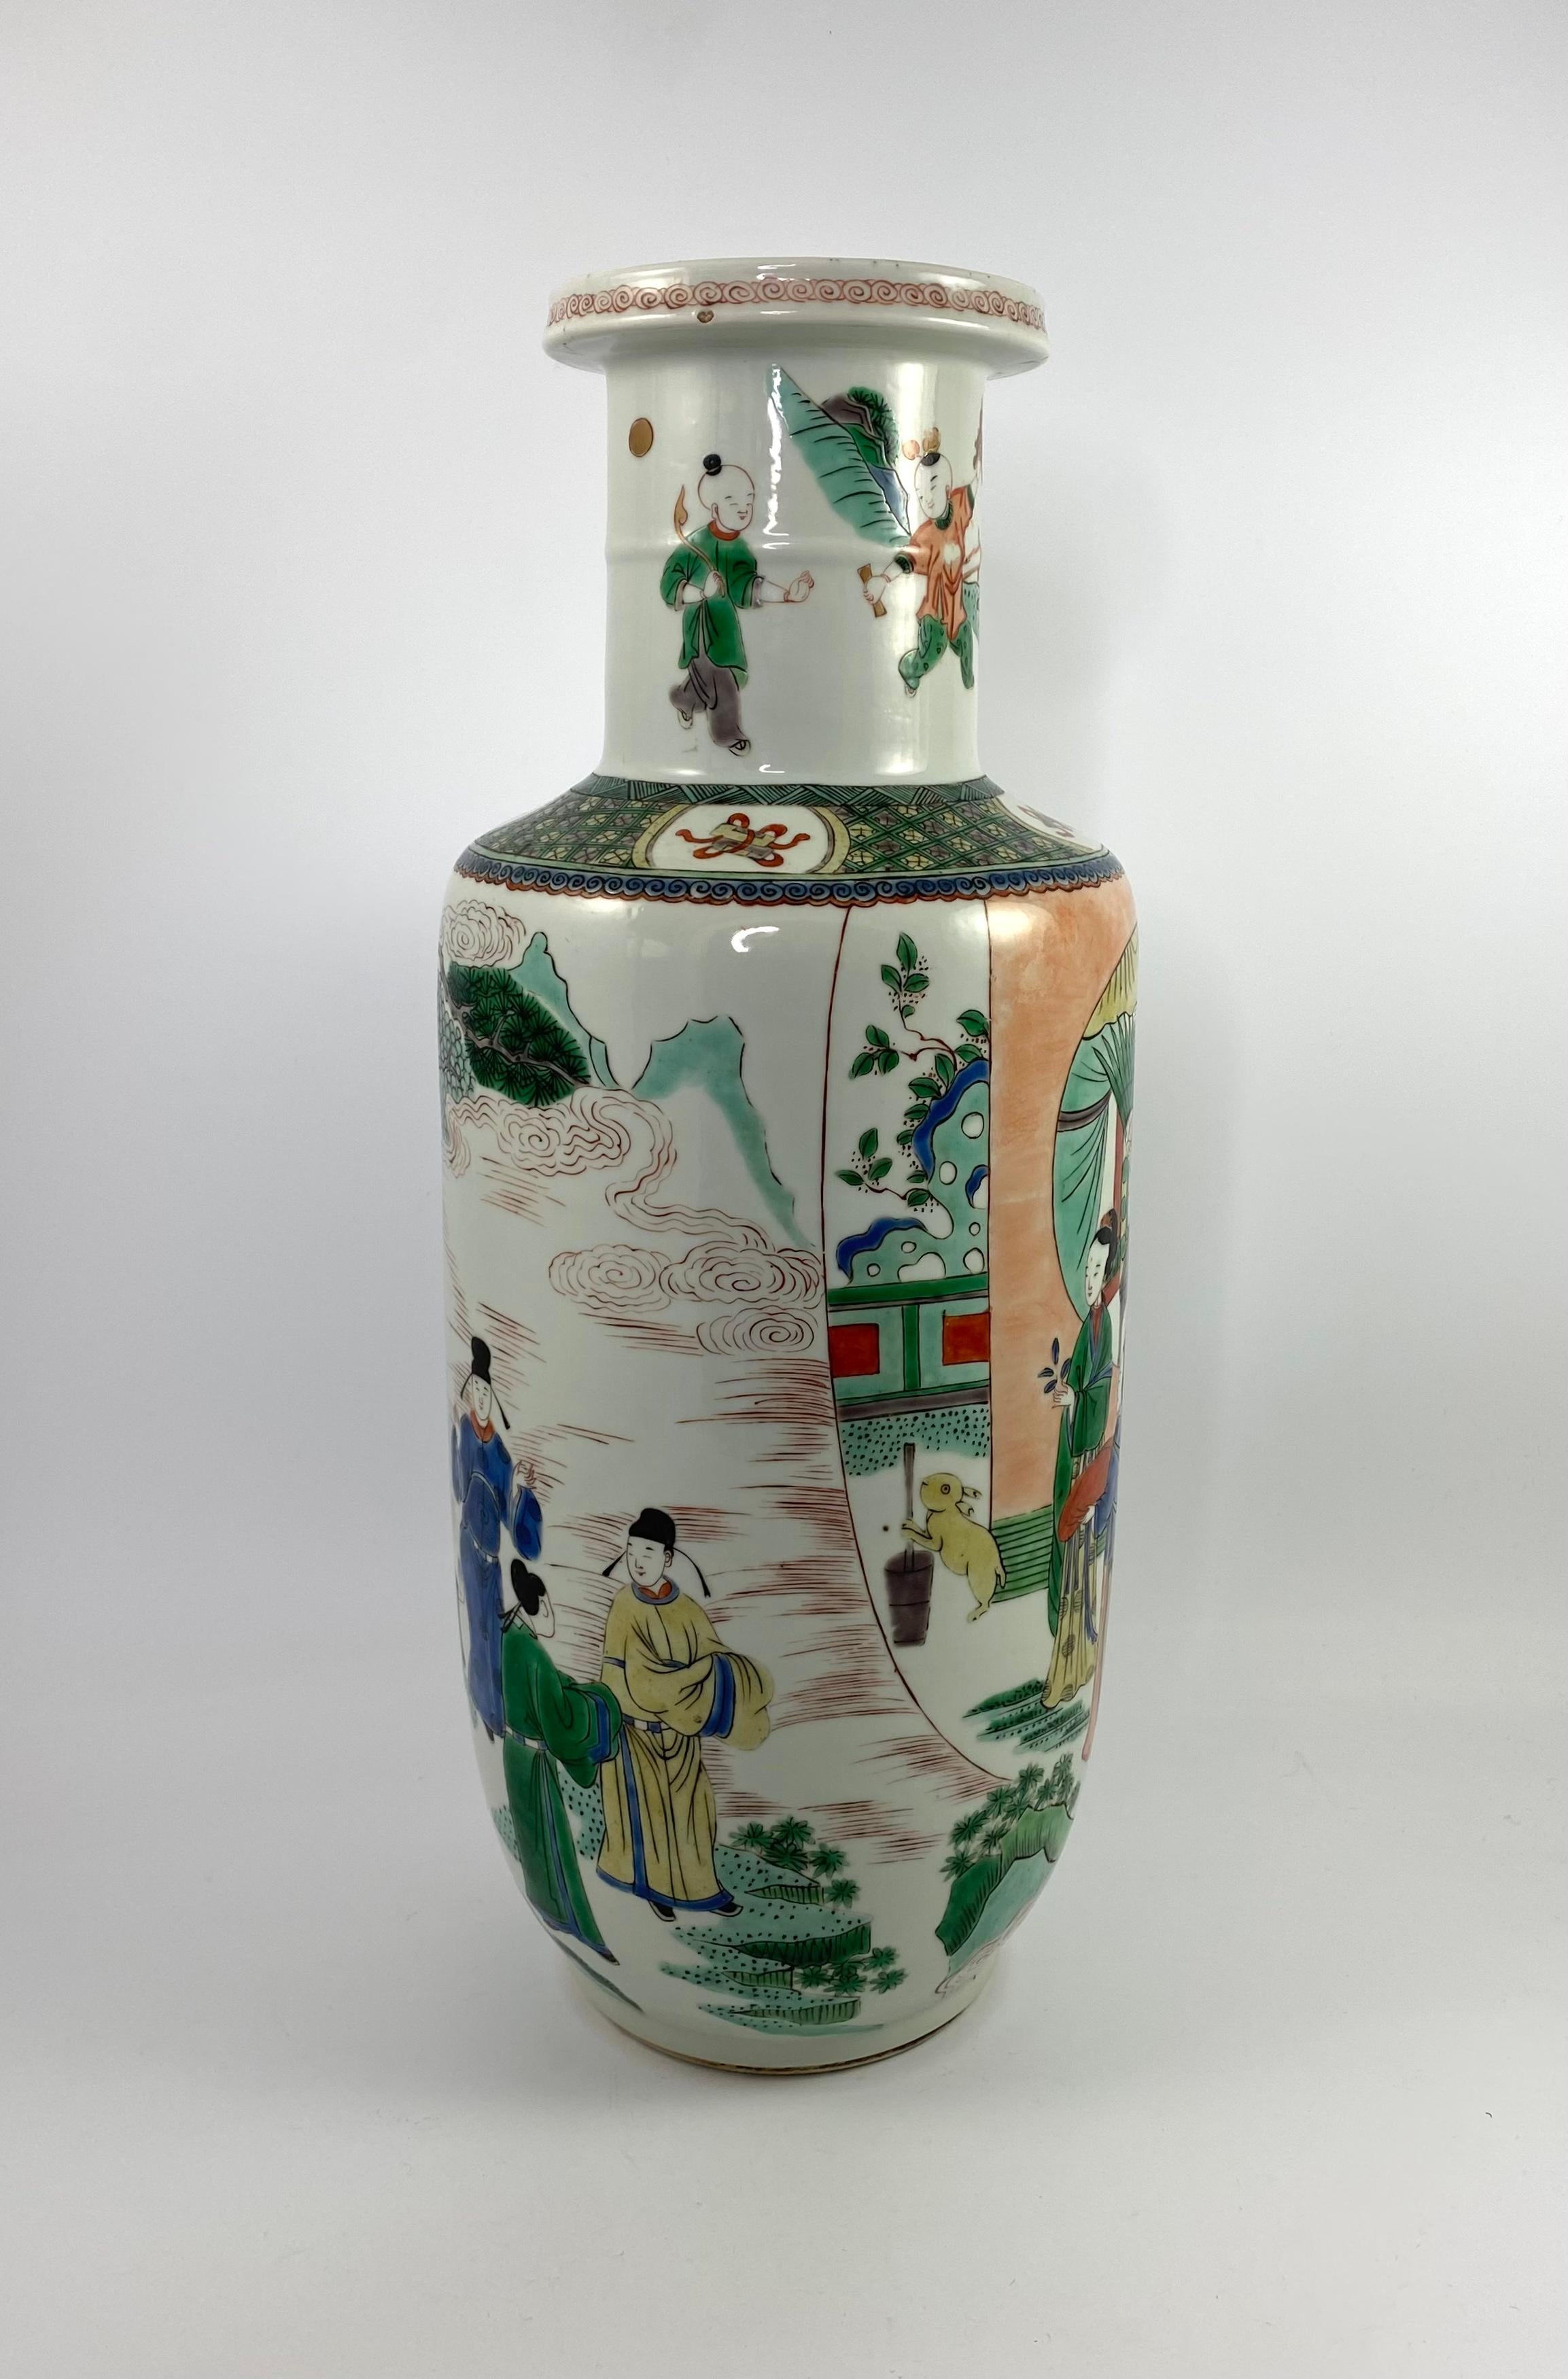 Chinese porcelain ‘rouleau’ vase, 19th Century, Qing Dynasty. The vase well painted in wucai or famille verte enamels, with a panel of ladies, observing a rabbit, in a garden, before a pavilion. A group of four men converse, before trees, and a